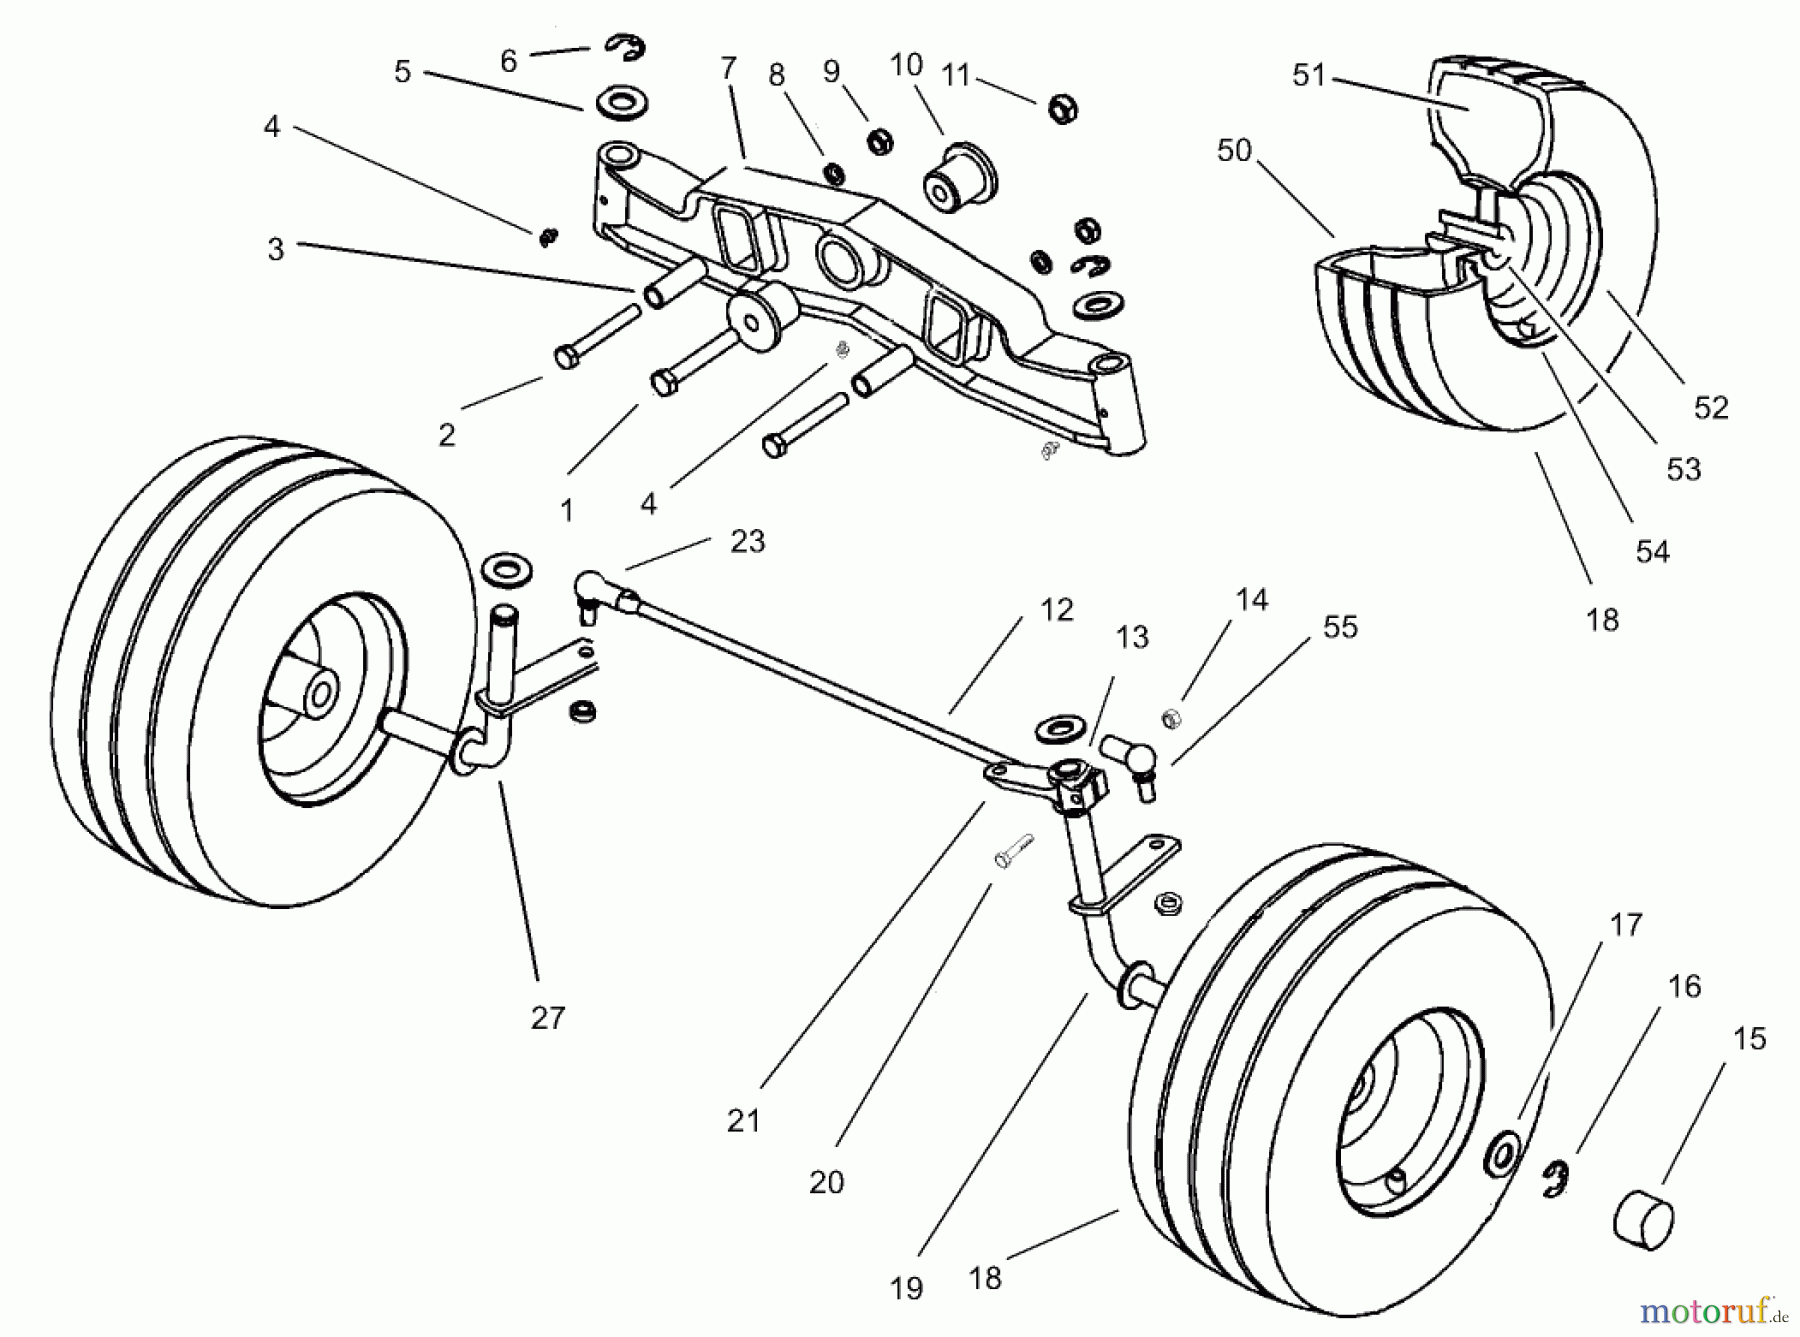  Toro Neu Mowers, Lawn & Garden Tractor Seite 1 74590 (190-DH) - Toro 190-DH Lawn Tractor, 2000 (200000001-200999999) FRONT AXLE ASSEMBLY